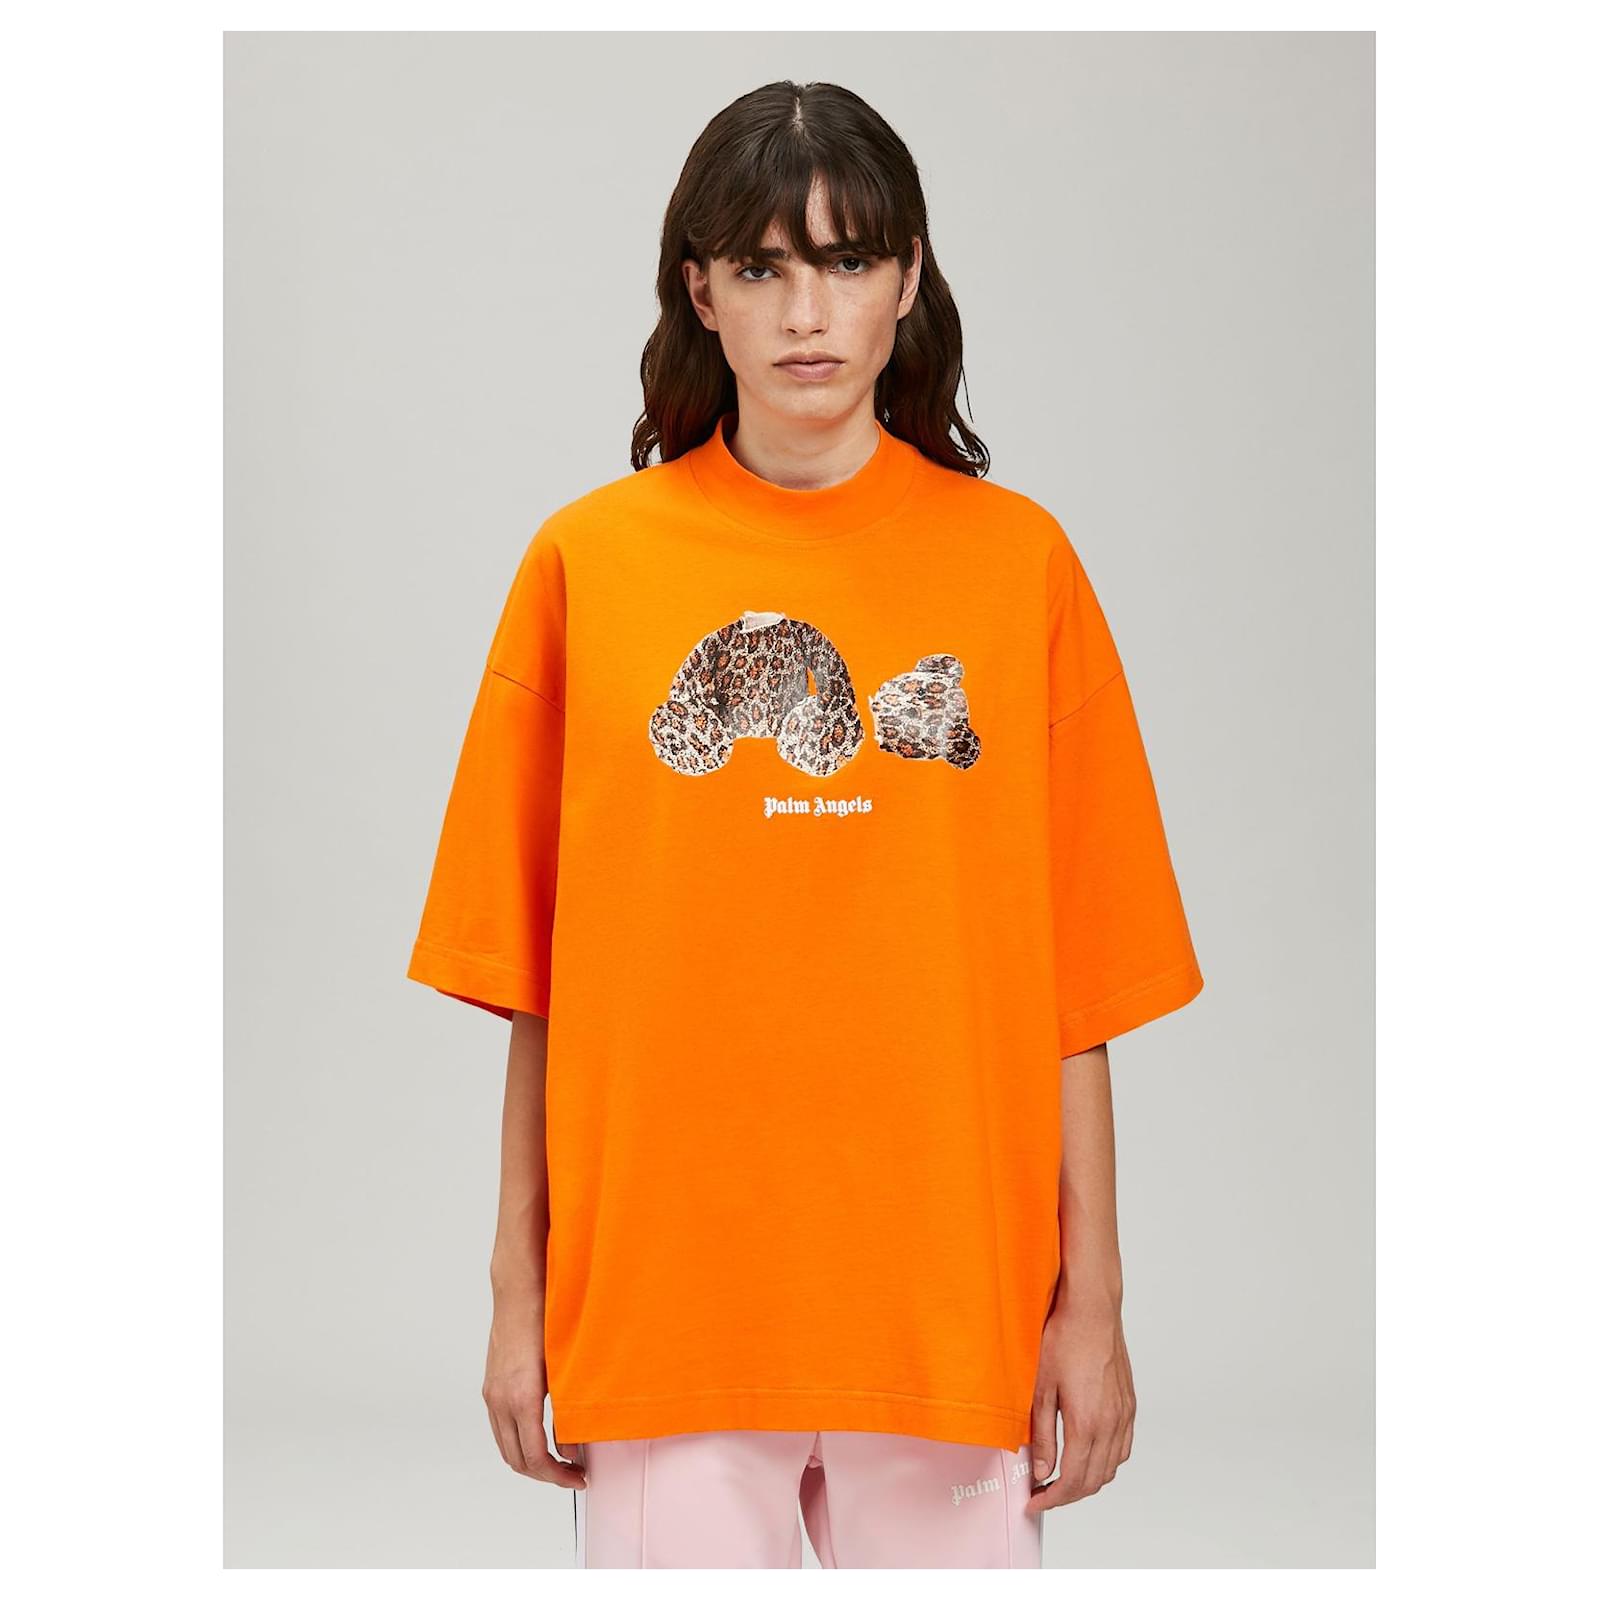 PALM ANGELS BEAR T-SHIRT in orange - Palm Angels® Official